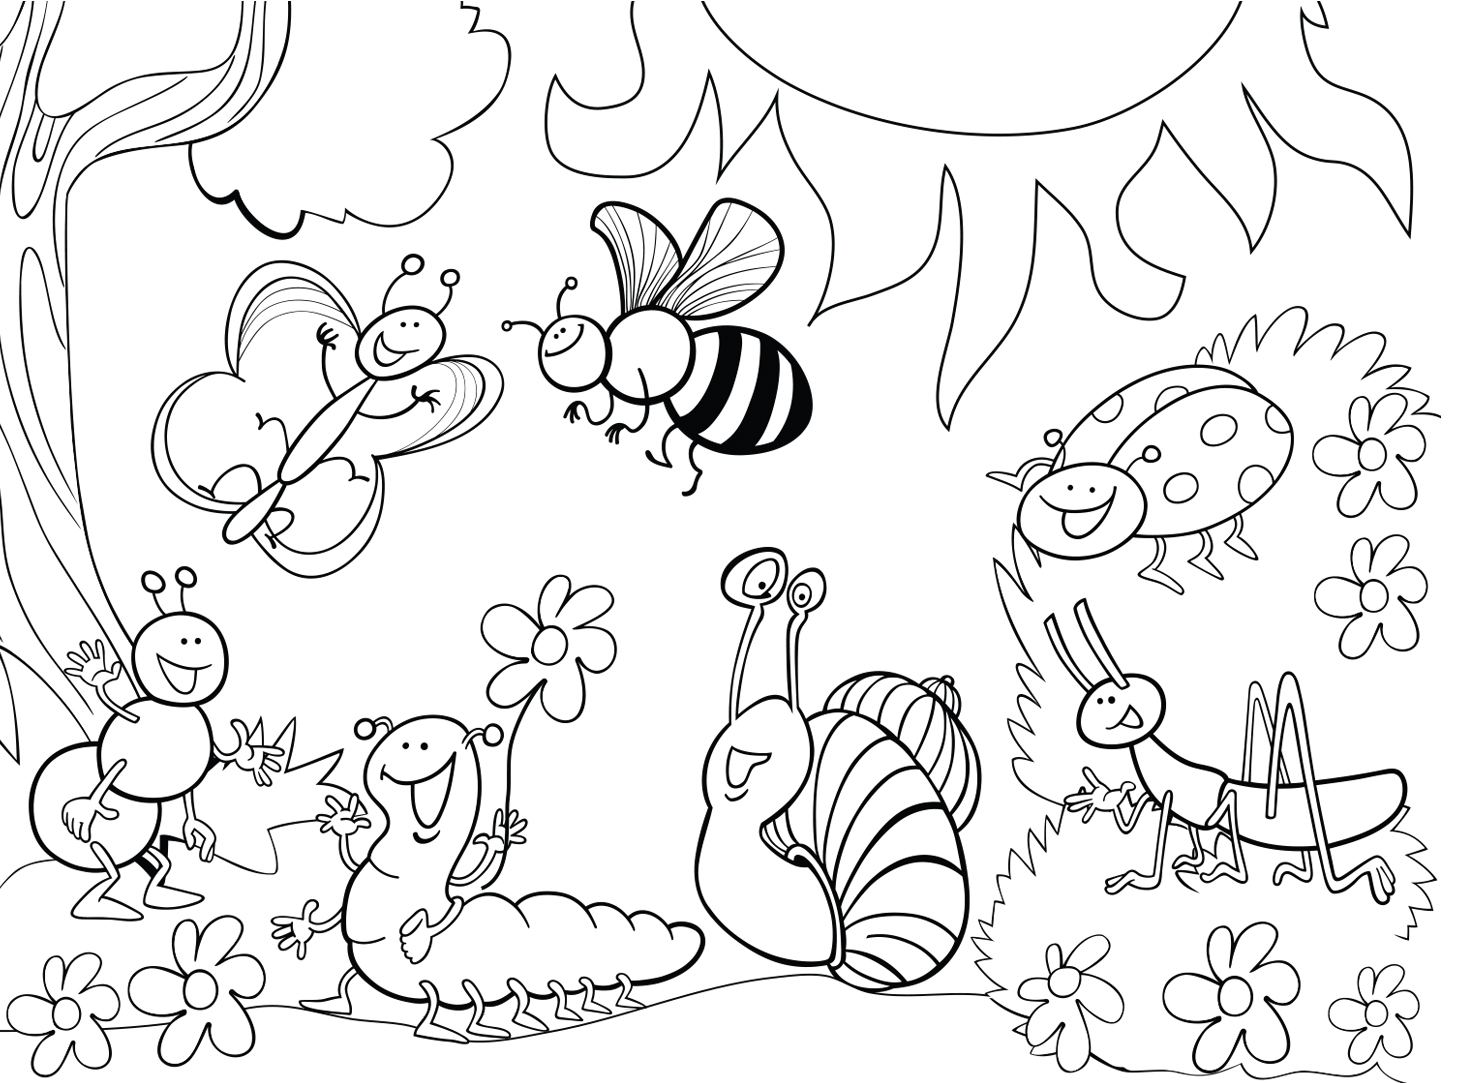 Coloring pages coloring.